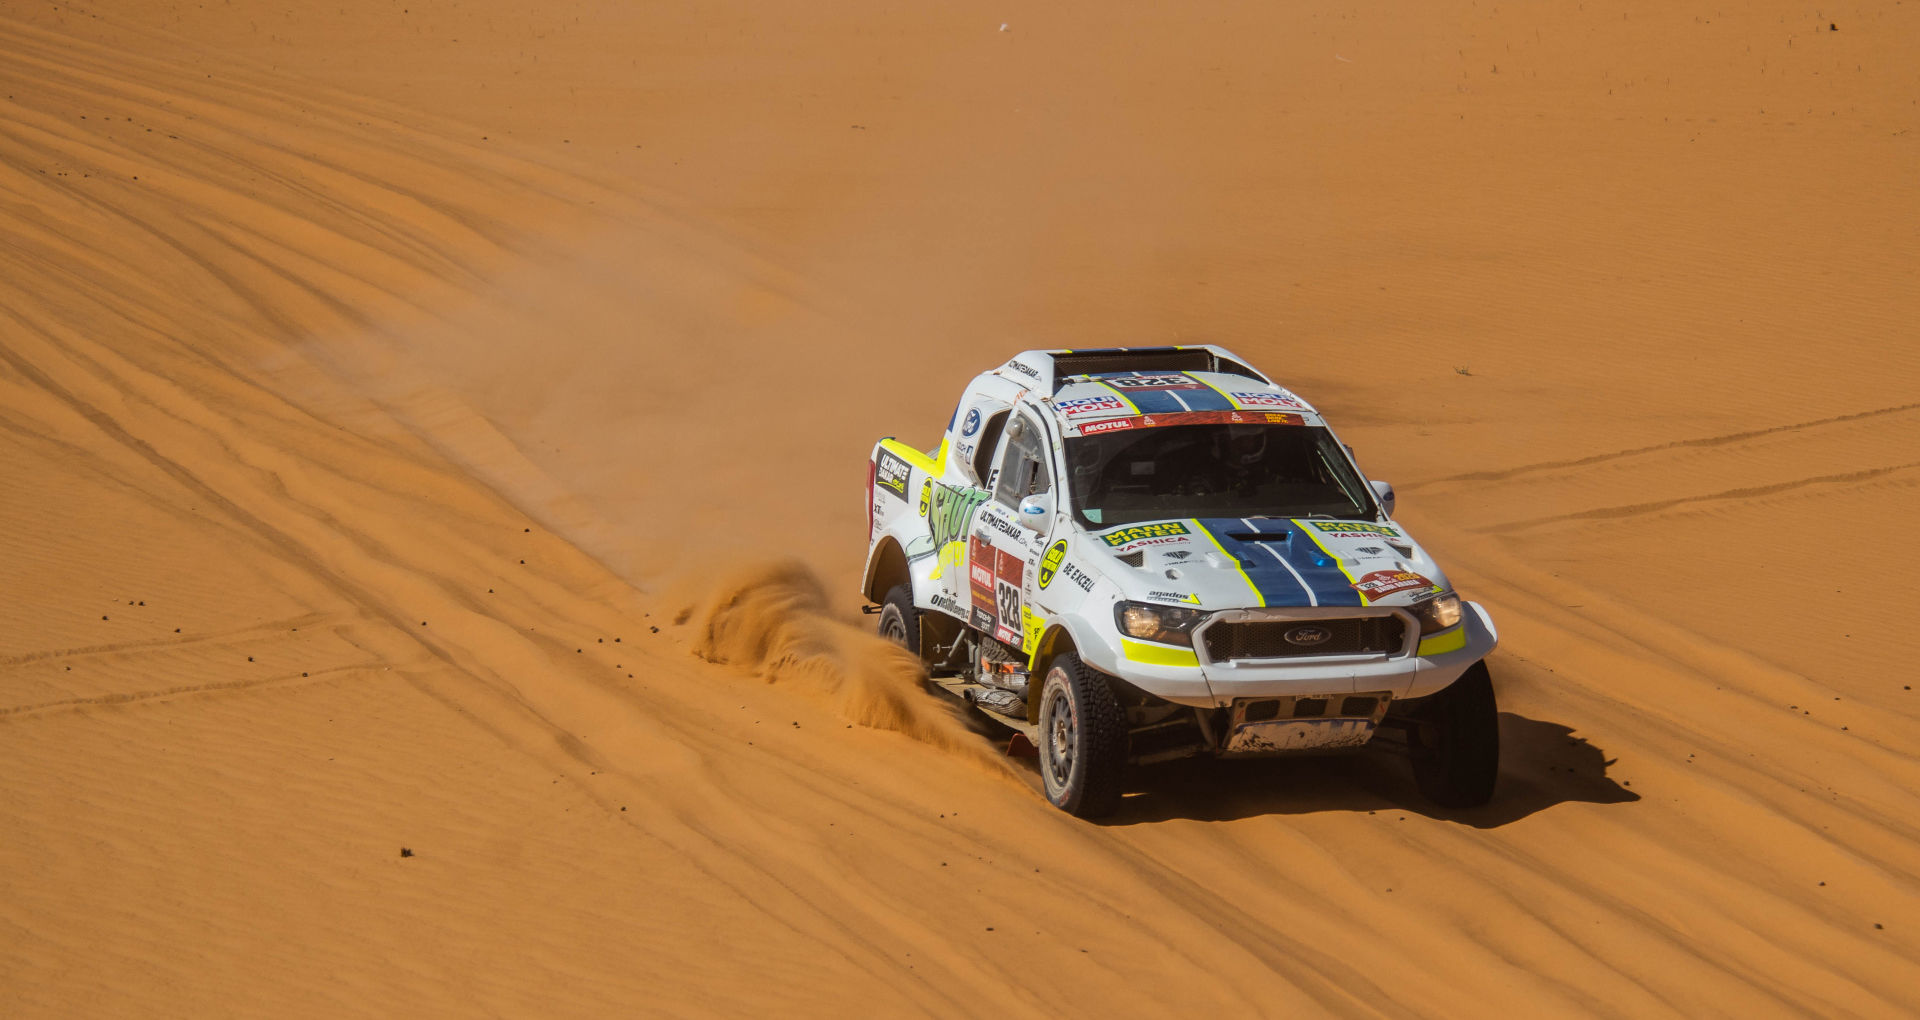 Ultimate Dakar’s crew scores another small victory